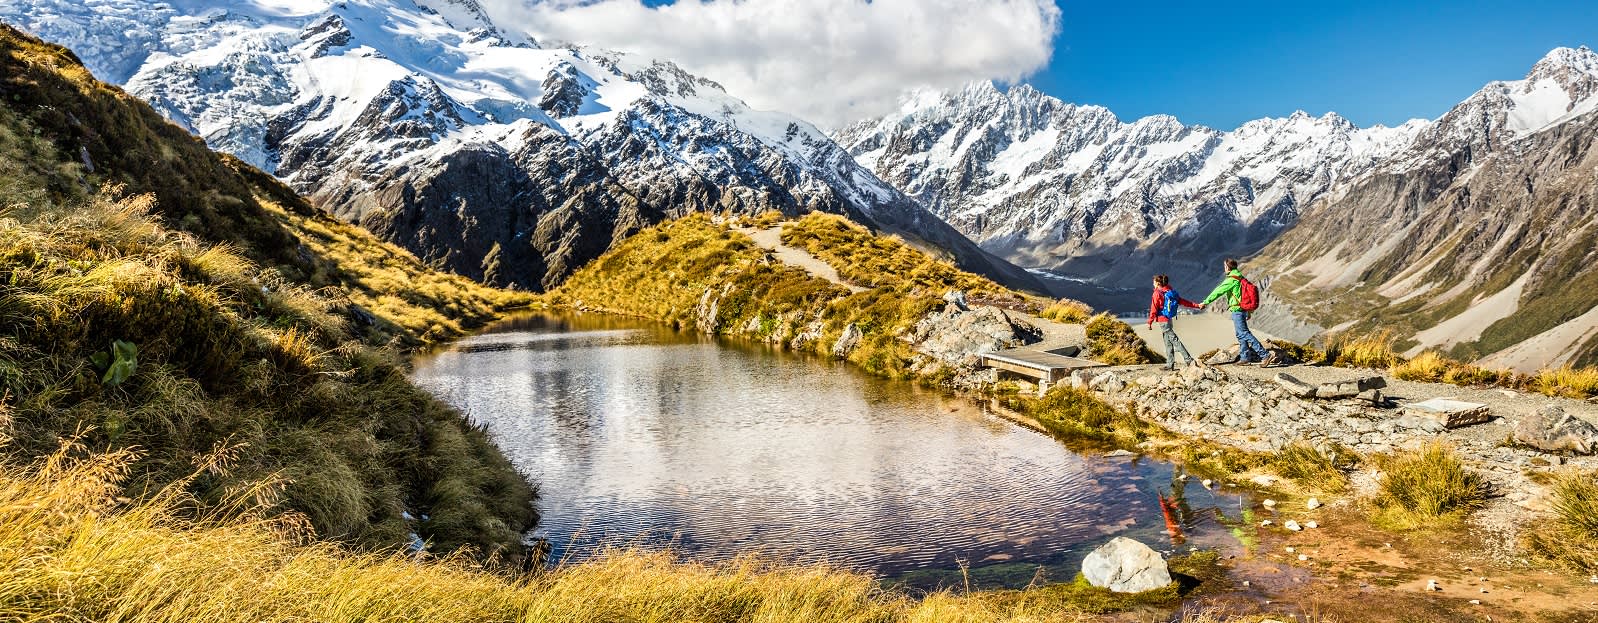 Hiking travel nature hikers in New Zealand. Couple people walking on Sealy Tarns hike trail route with Mount Cook landscape, famous tourist attraction - New Zealand travel